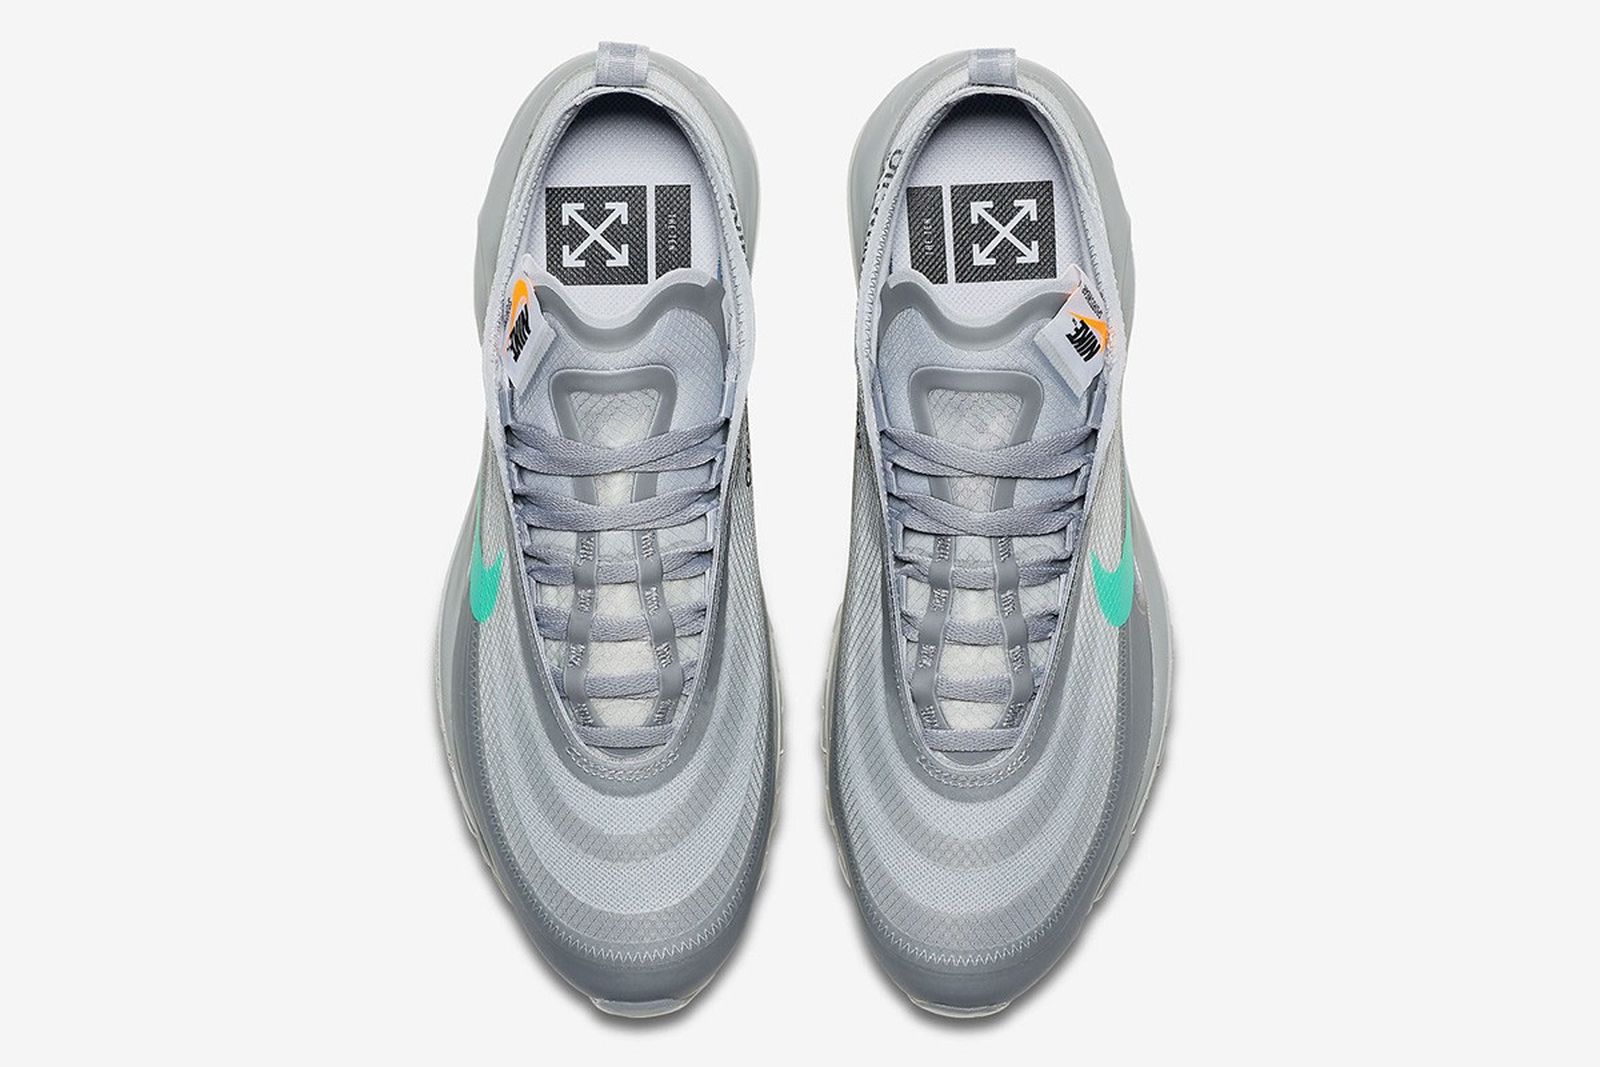 off-white-nike-air-max-97-menta-release-date-price-01